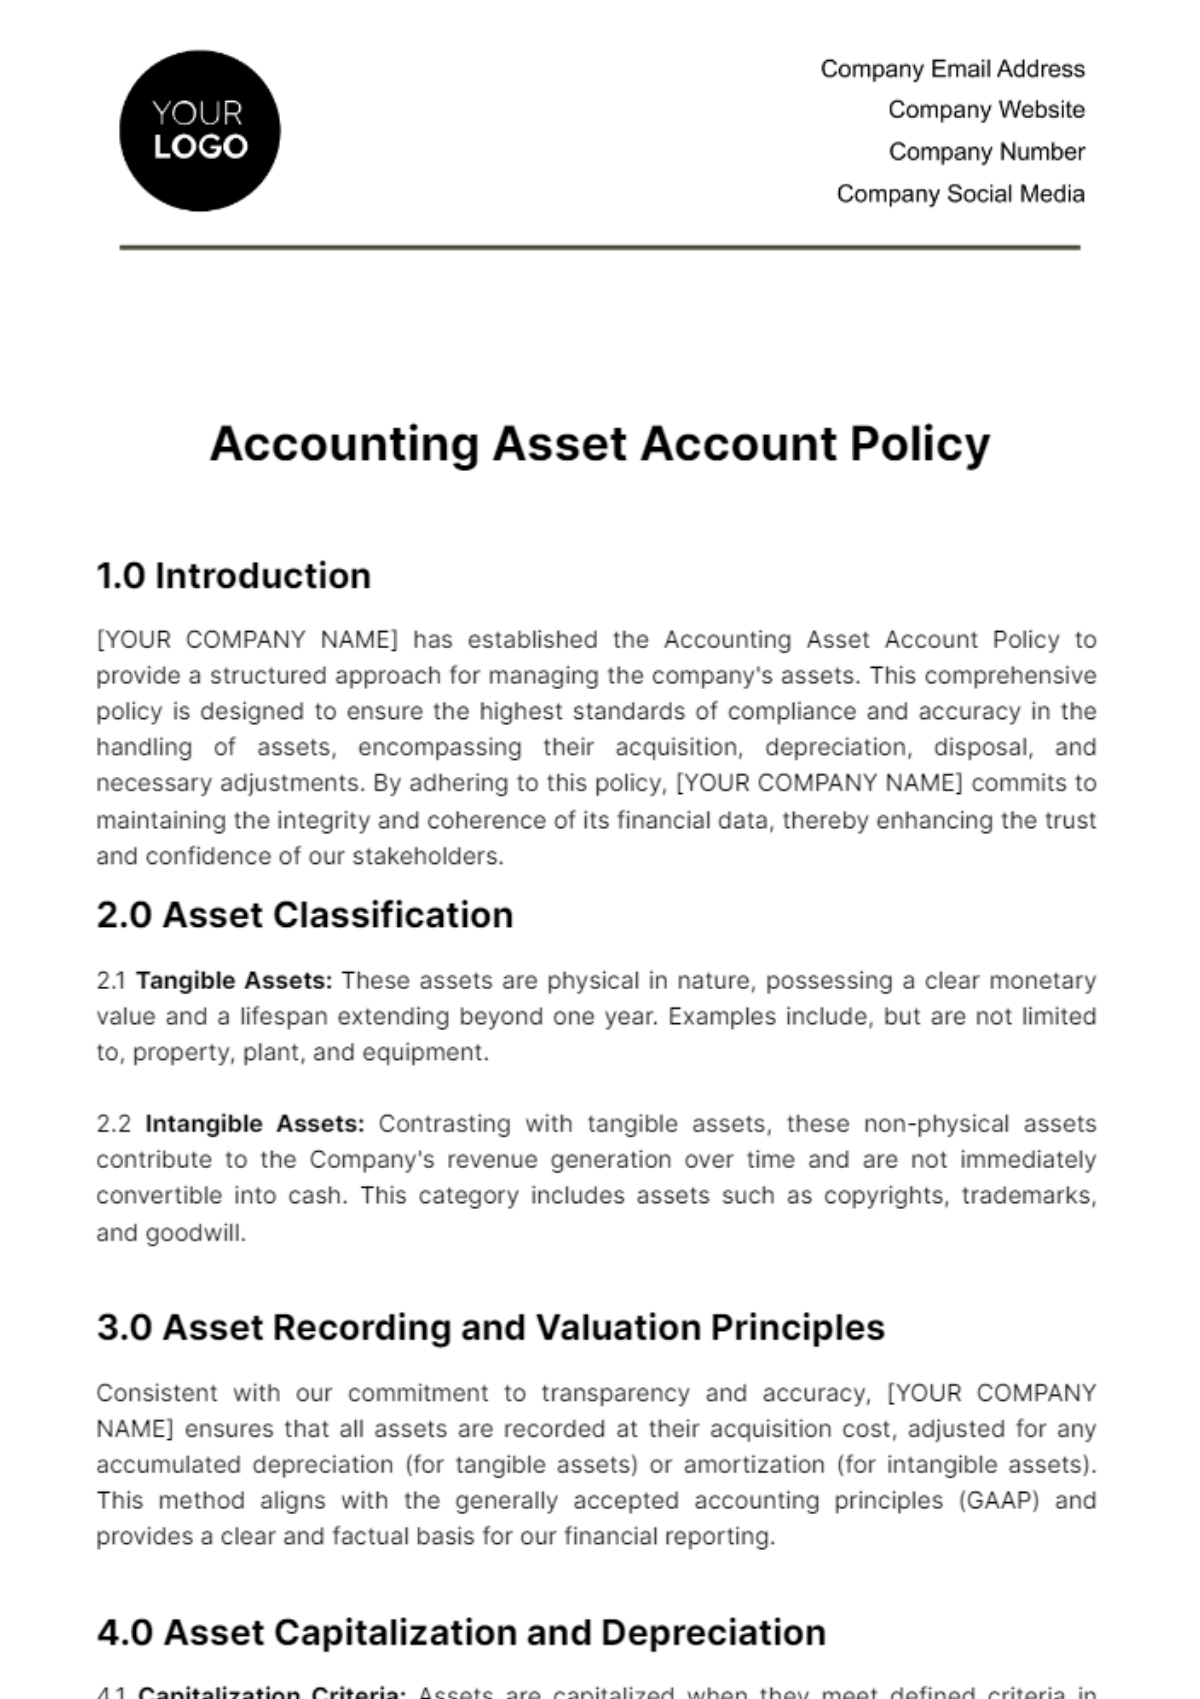 Accounting Asset Account Policy Template